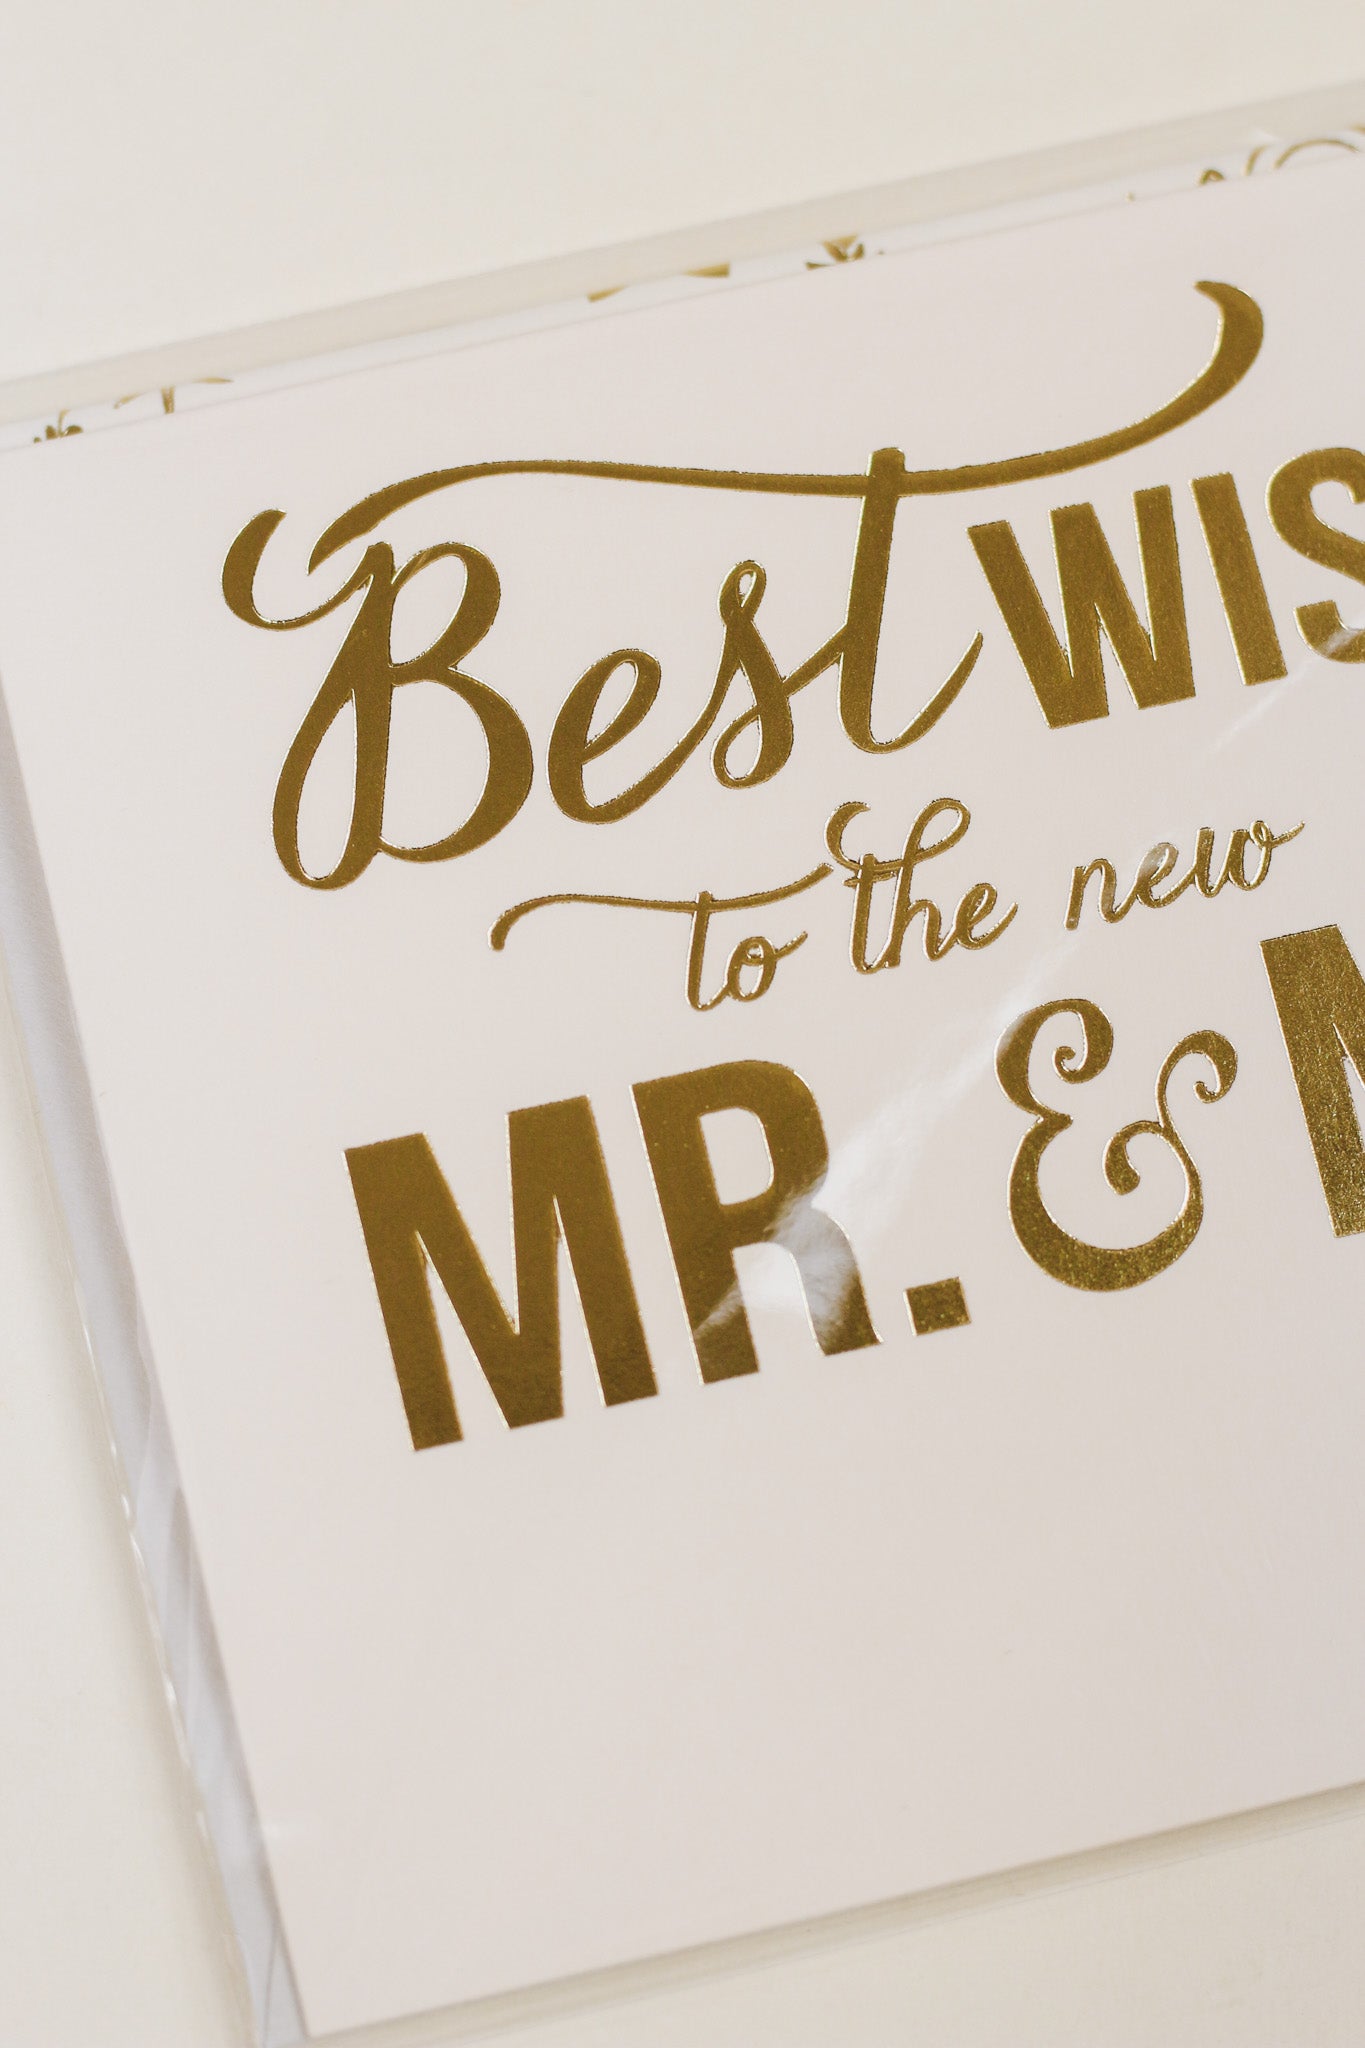 Best Wishes Mr. and Mrs. Wedding Greeting Card